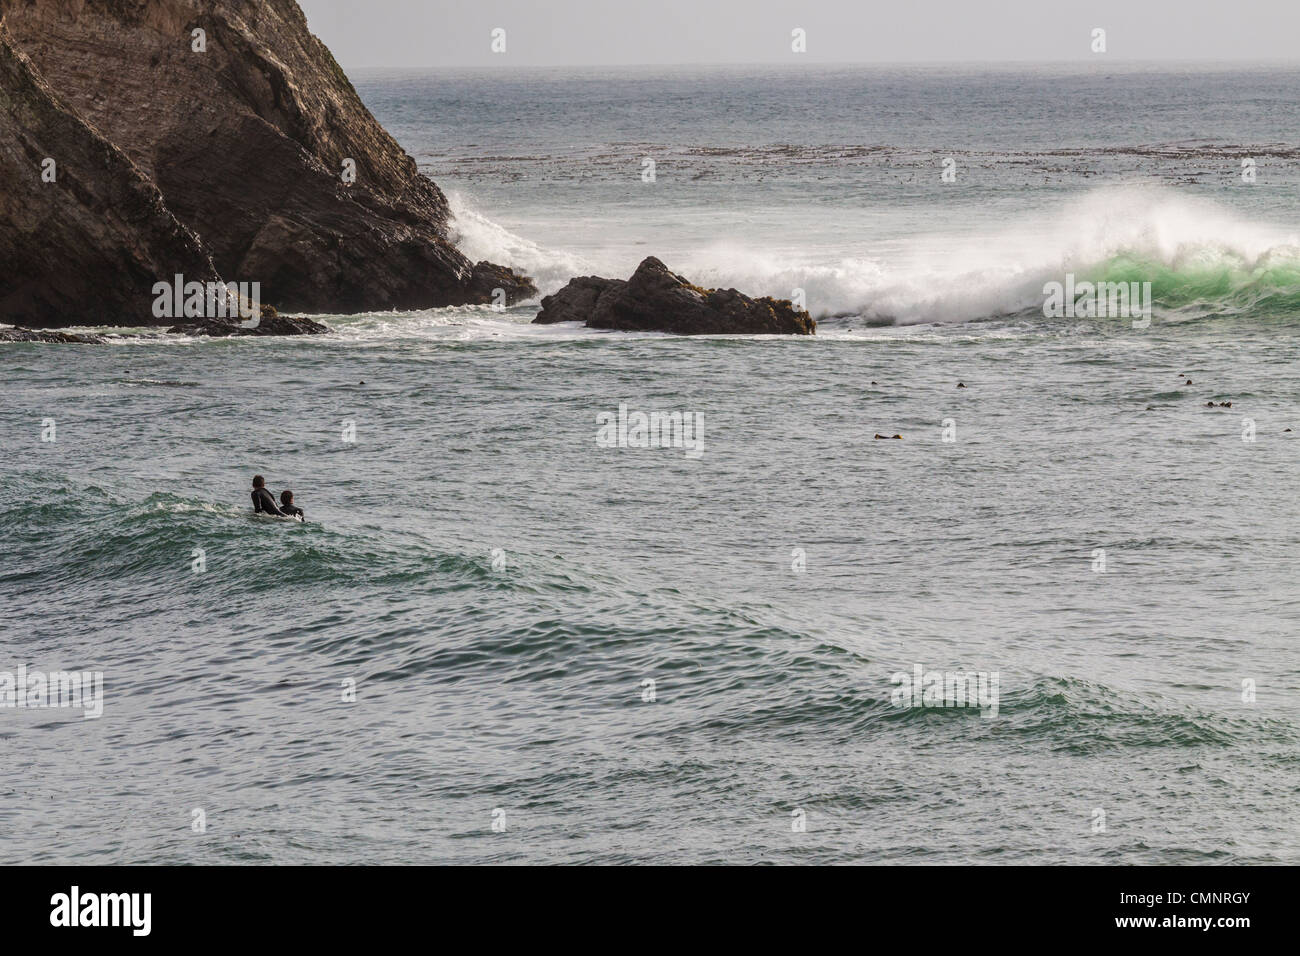 Stormy weather and surfers waiting for a wave in Pacific Ocean at Point Arena Pier inlet on Northern California coast. Stock Photo